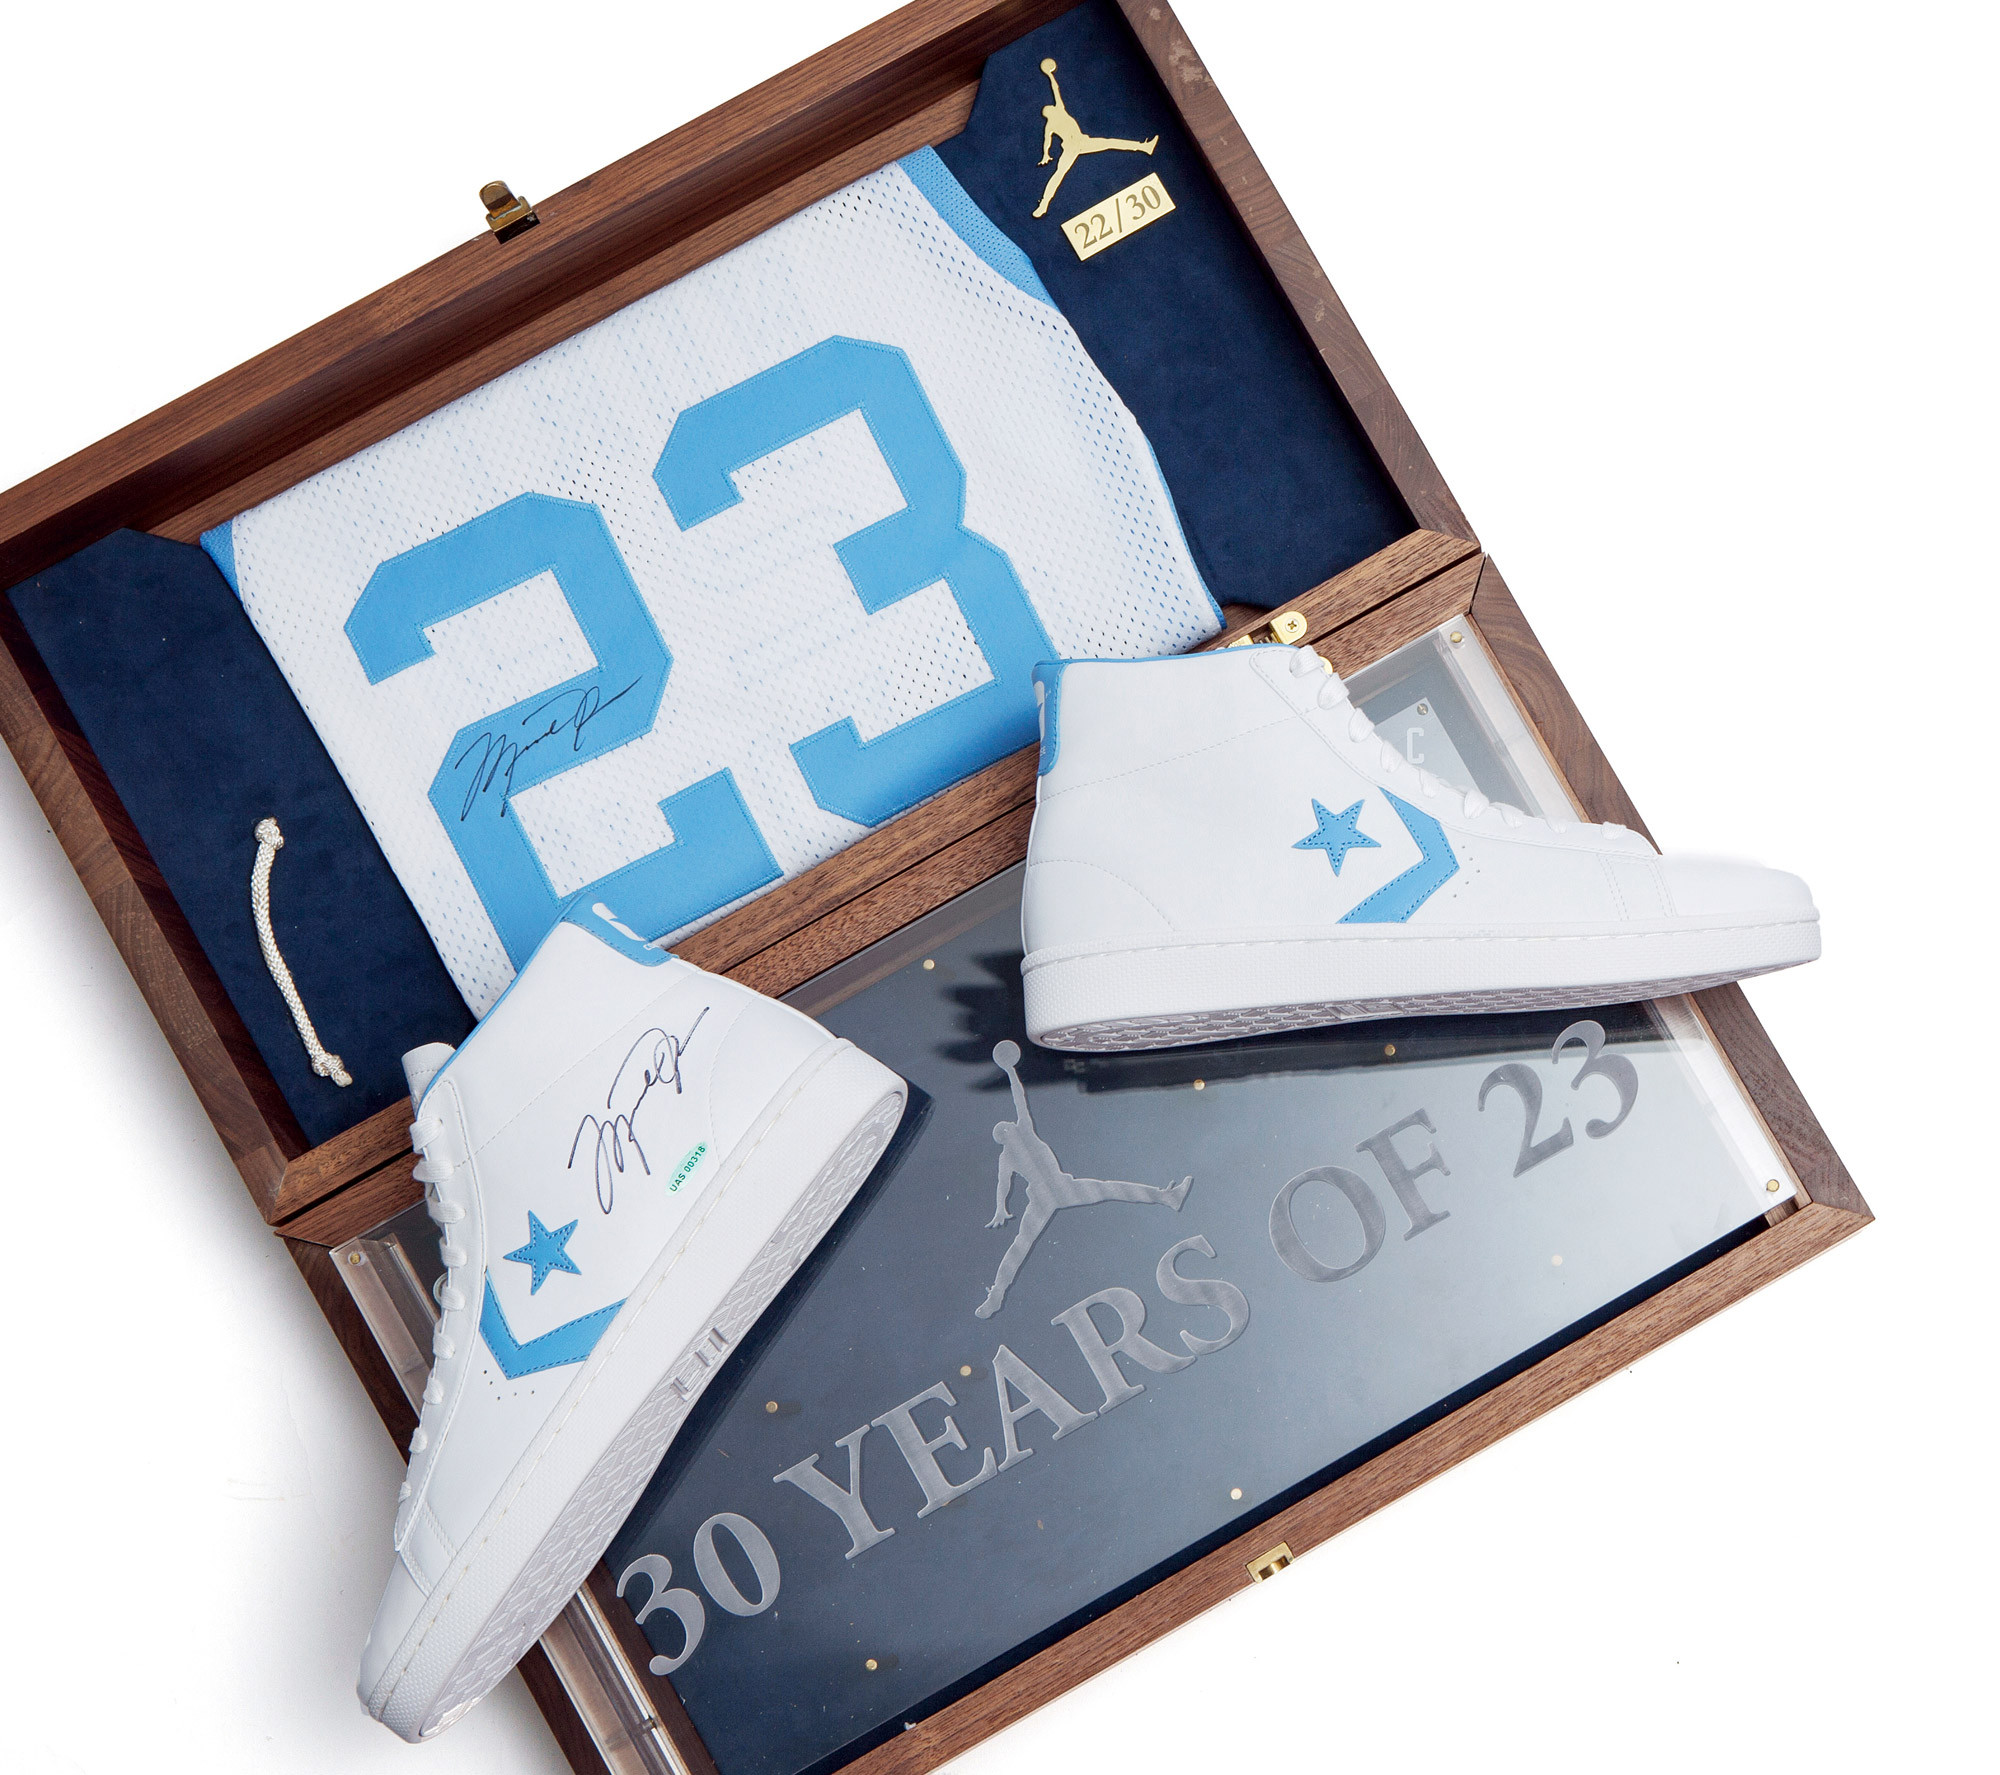 Jordan & Converse“30 Years of 23” Collection